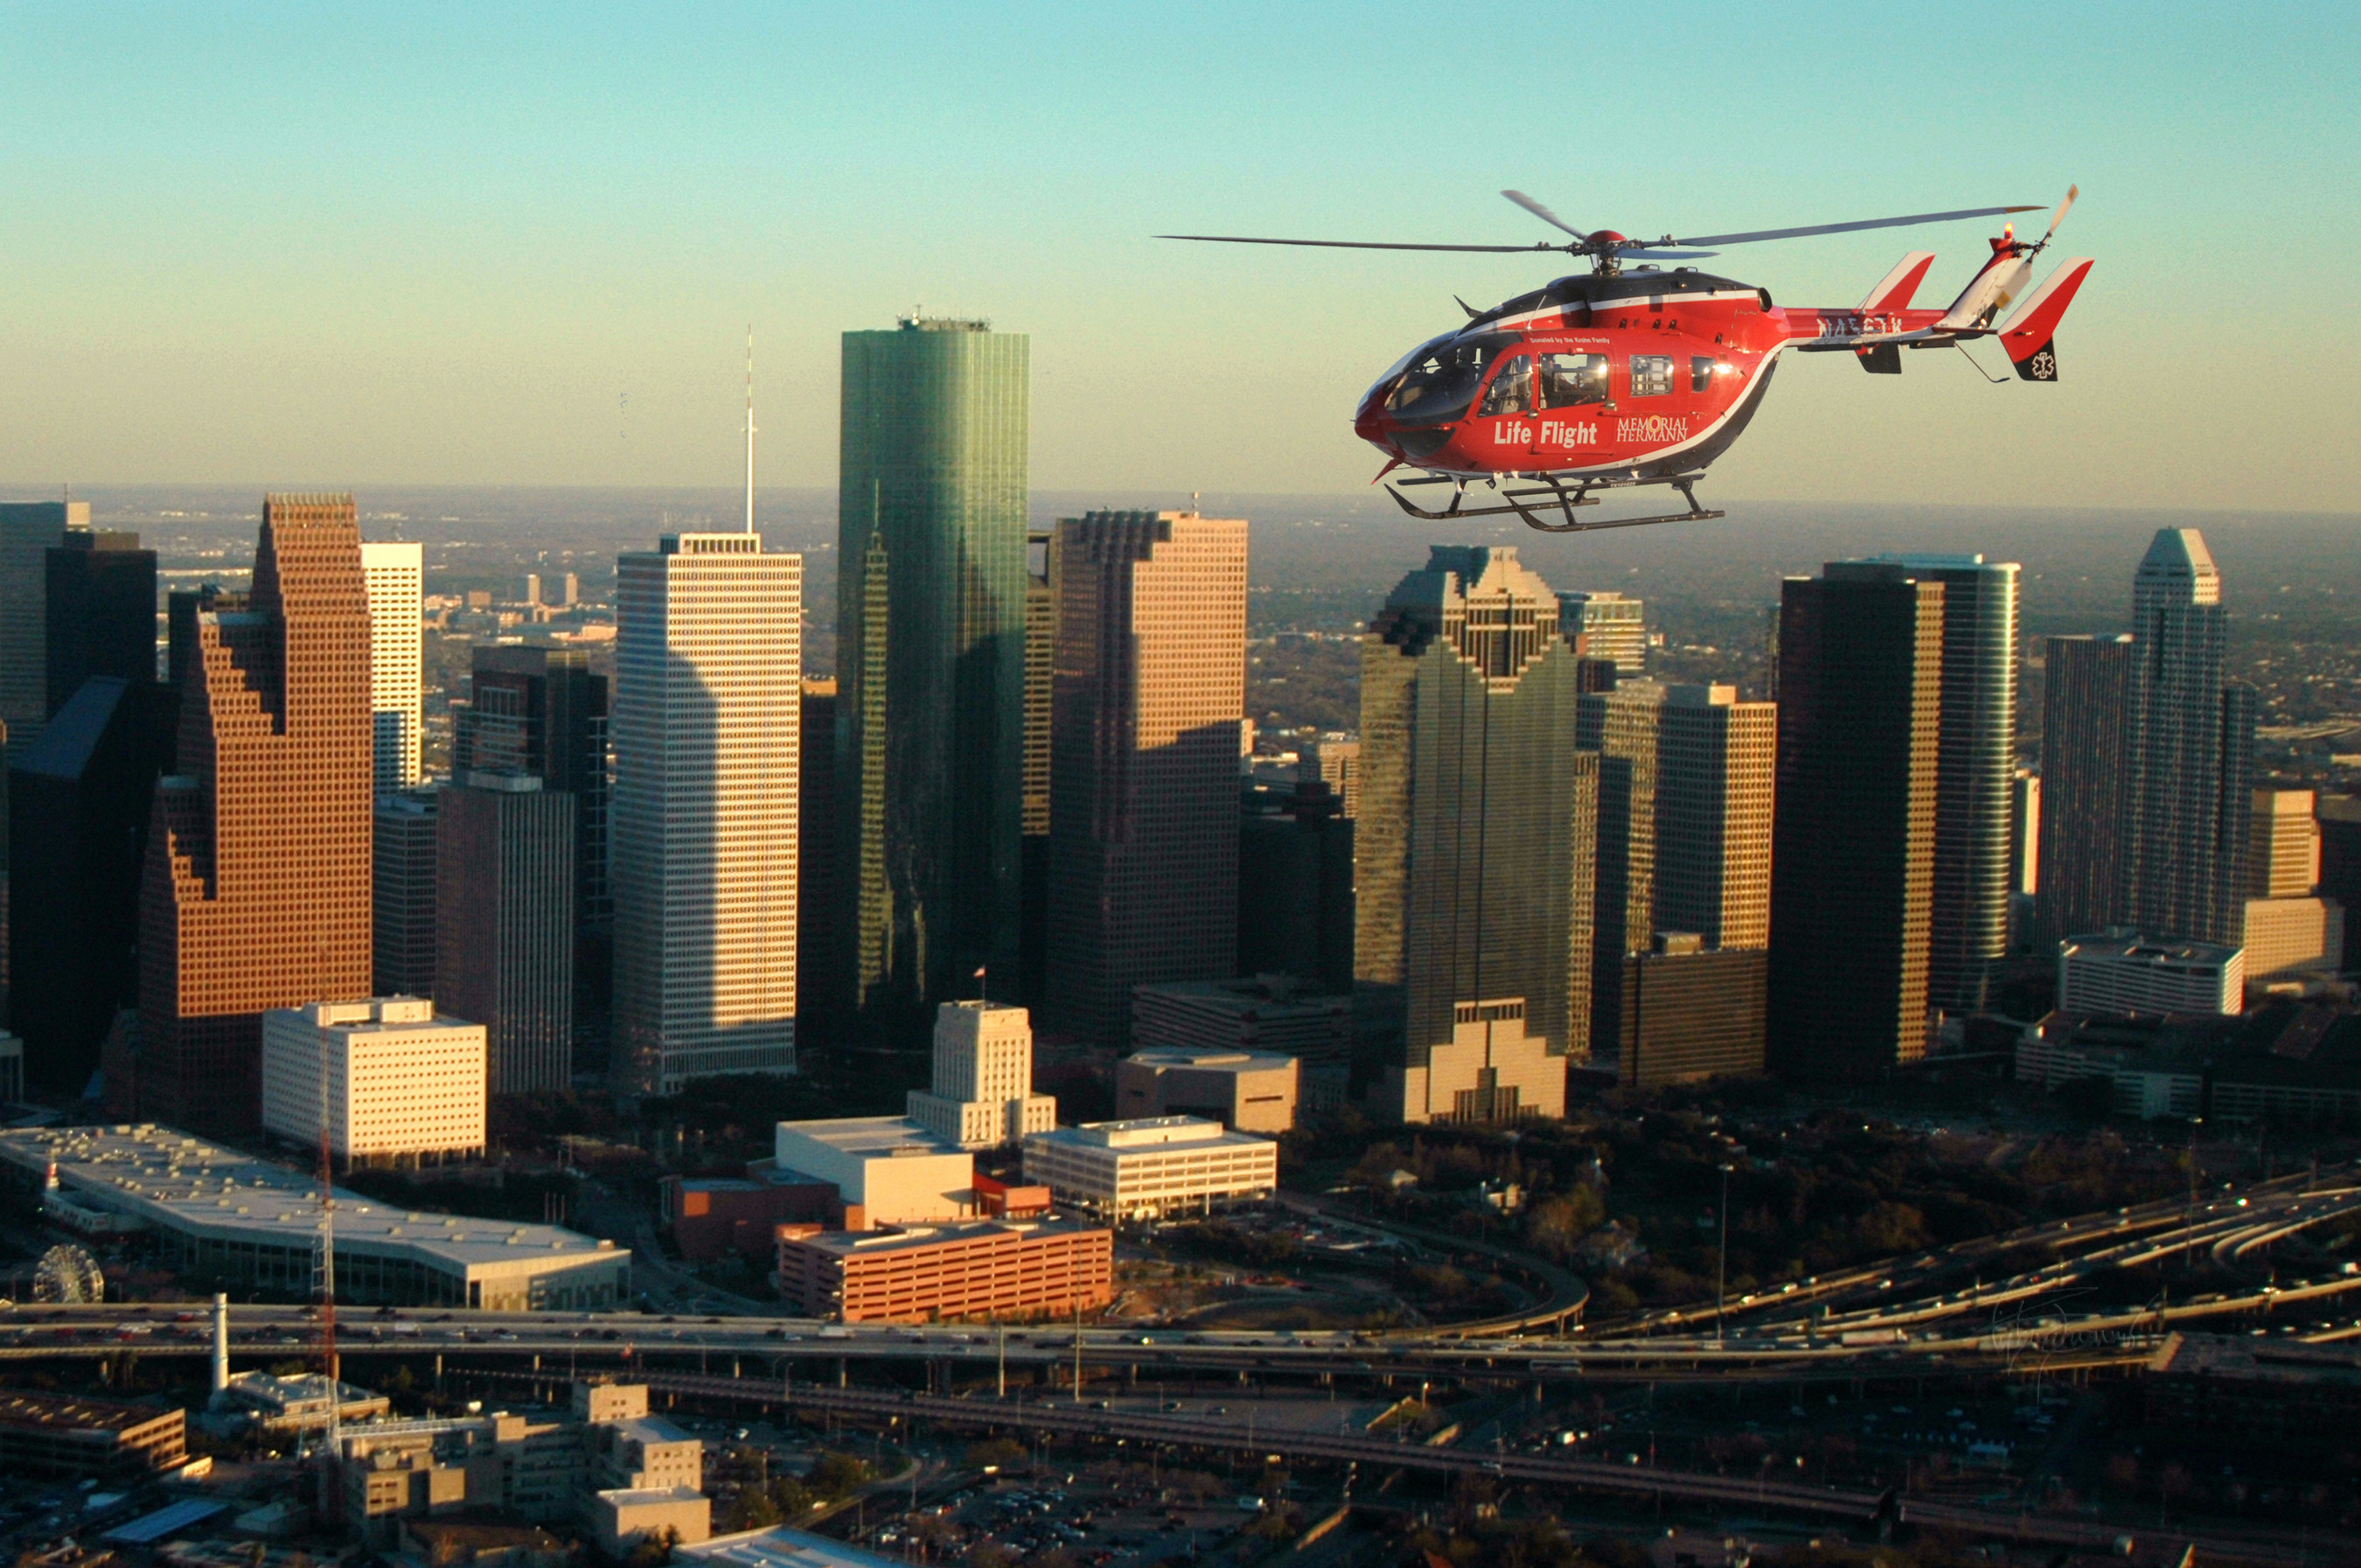 Memorial Hermann Life Flight(R) serves the community within a 150-mile radius of the Texas Medical Center and plays a critical role in Memorial Hermann's integrated trauma network.